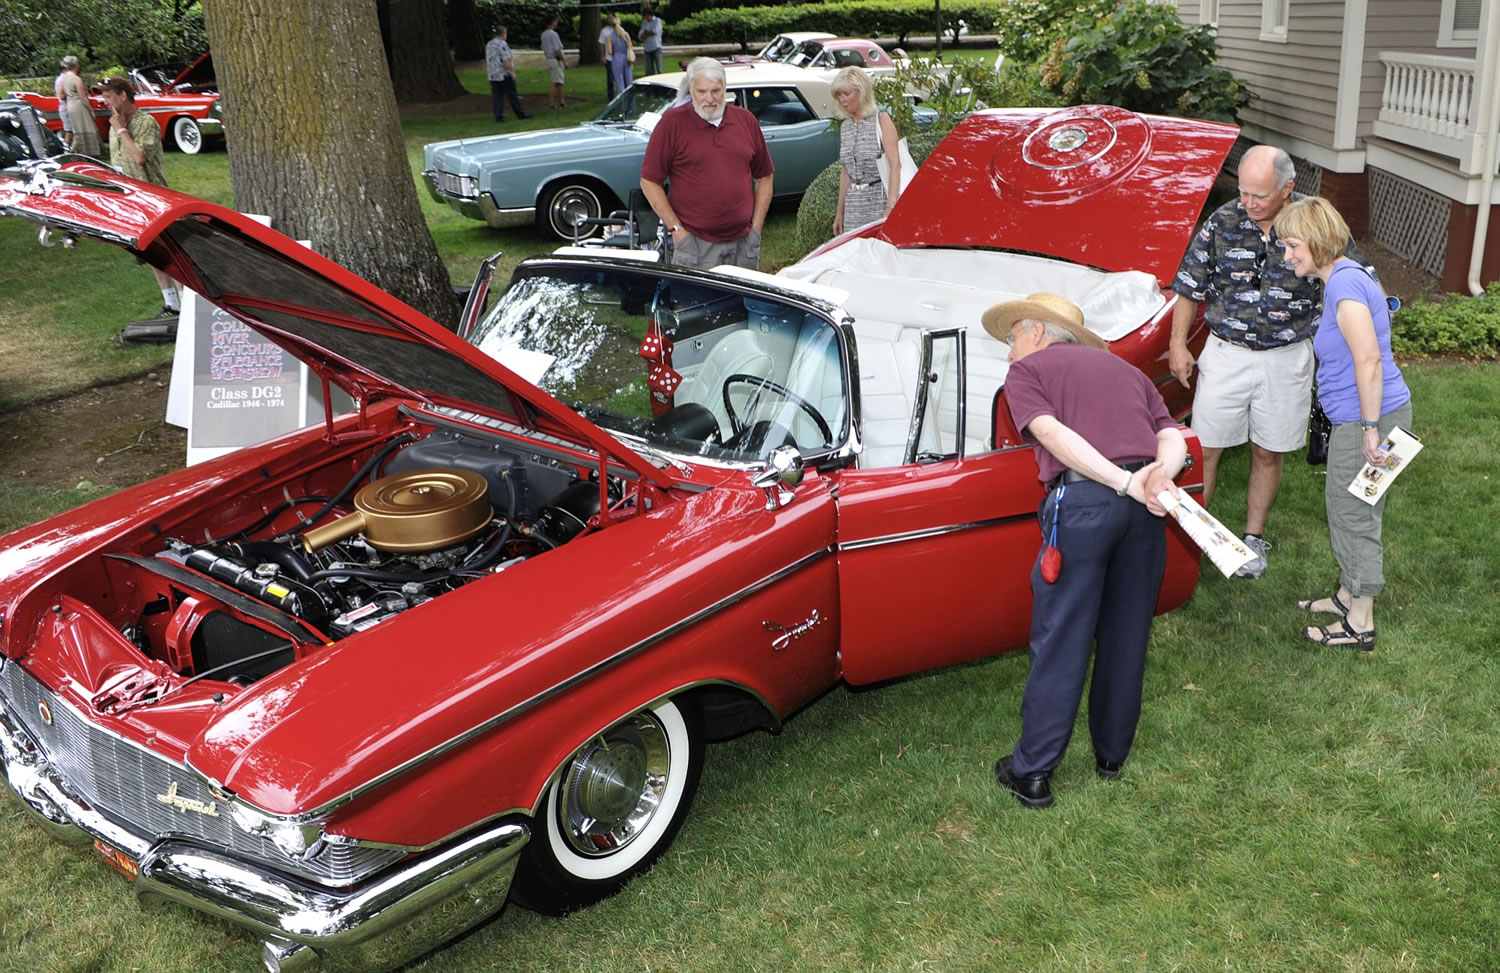 Visitors admire a 'Regal Red' 1960 Chrysler Crown Imperial owned by Joel Holland of Sumner, Wa, at the 2015 Concourse d'Elegance at Officers Row in the Fort Vancouver historic site in Vancouver  Wa., Sunday August 2, 2015.